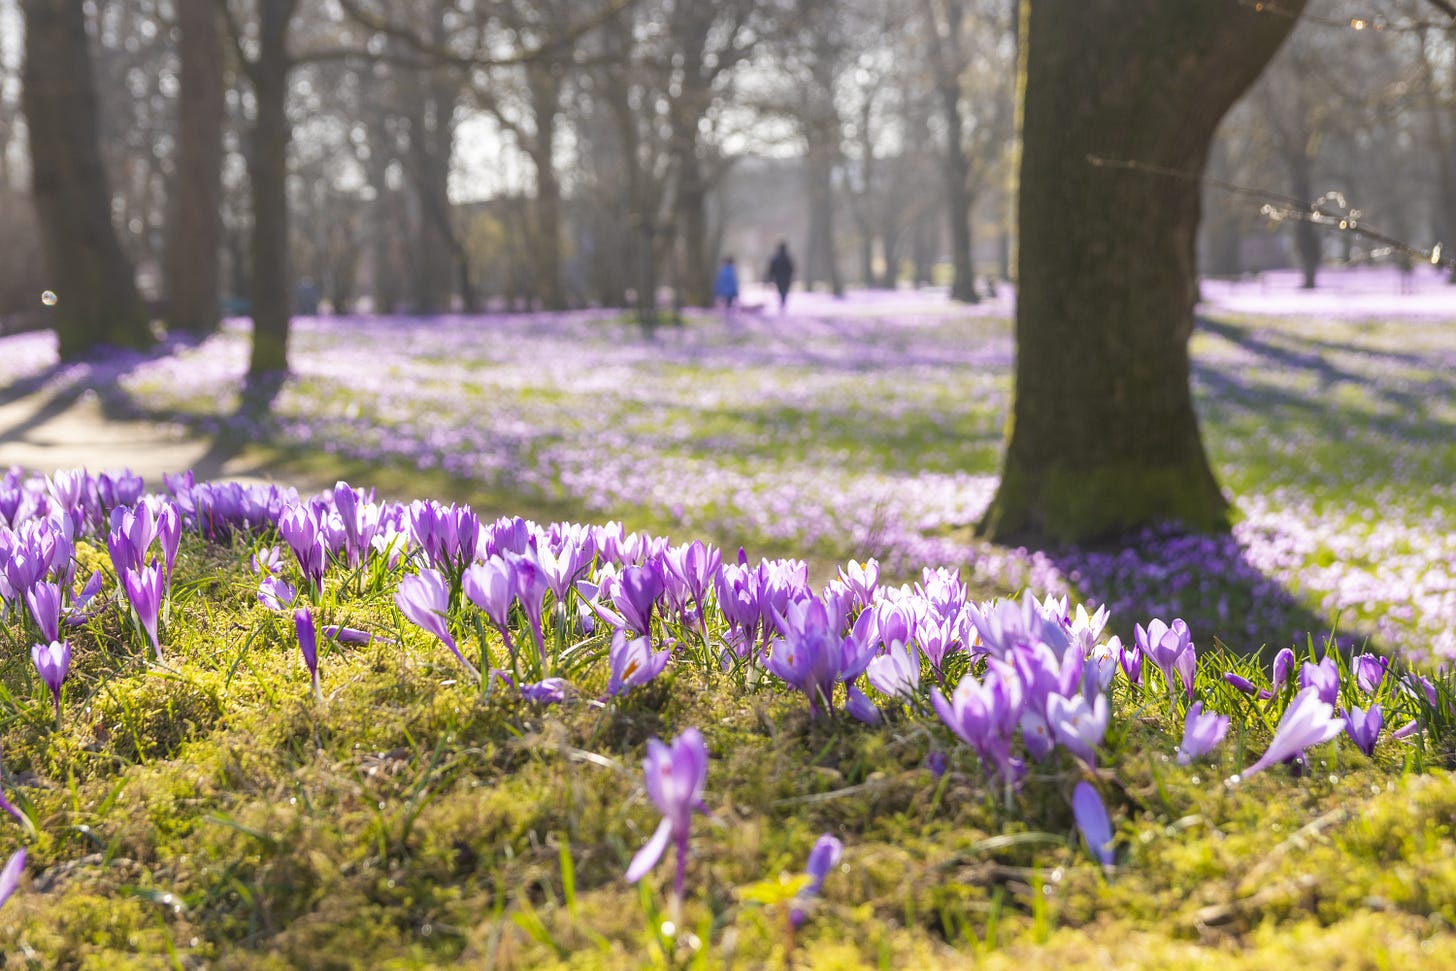 Hundreds of purple crocuses in a grassy area with lots of trees in. There are two people, blurry, in the distance.